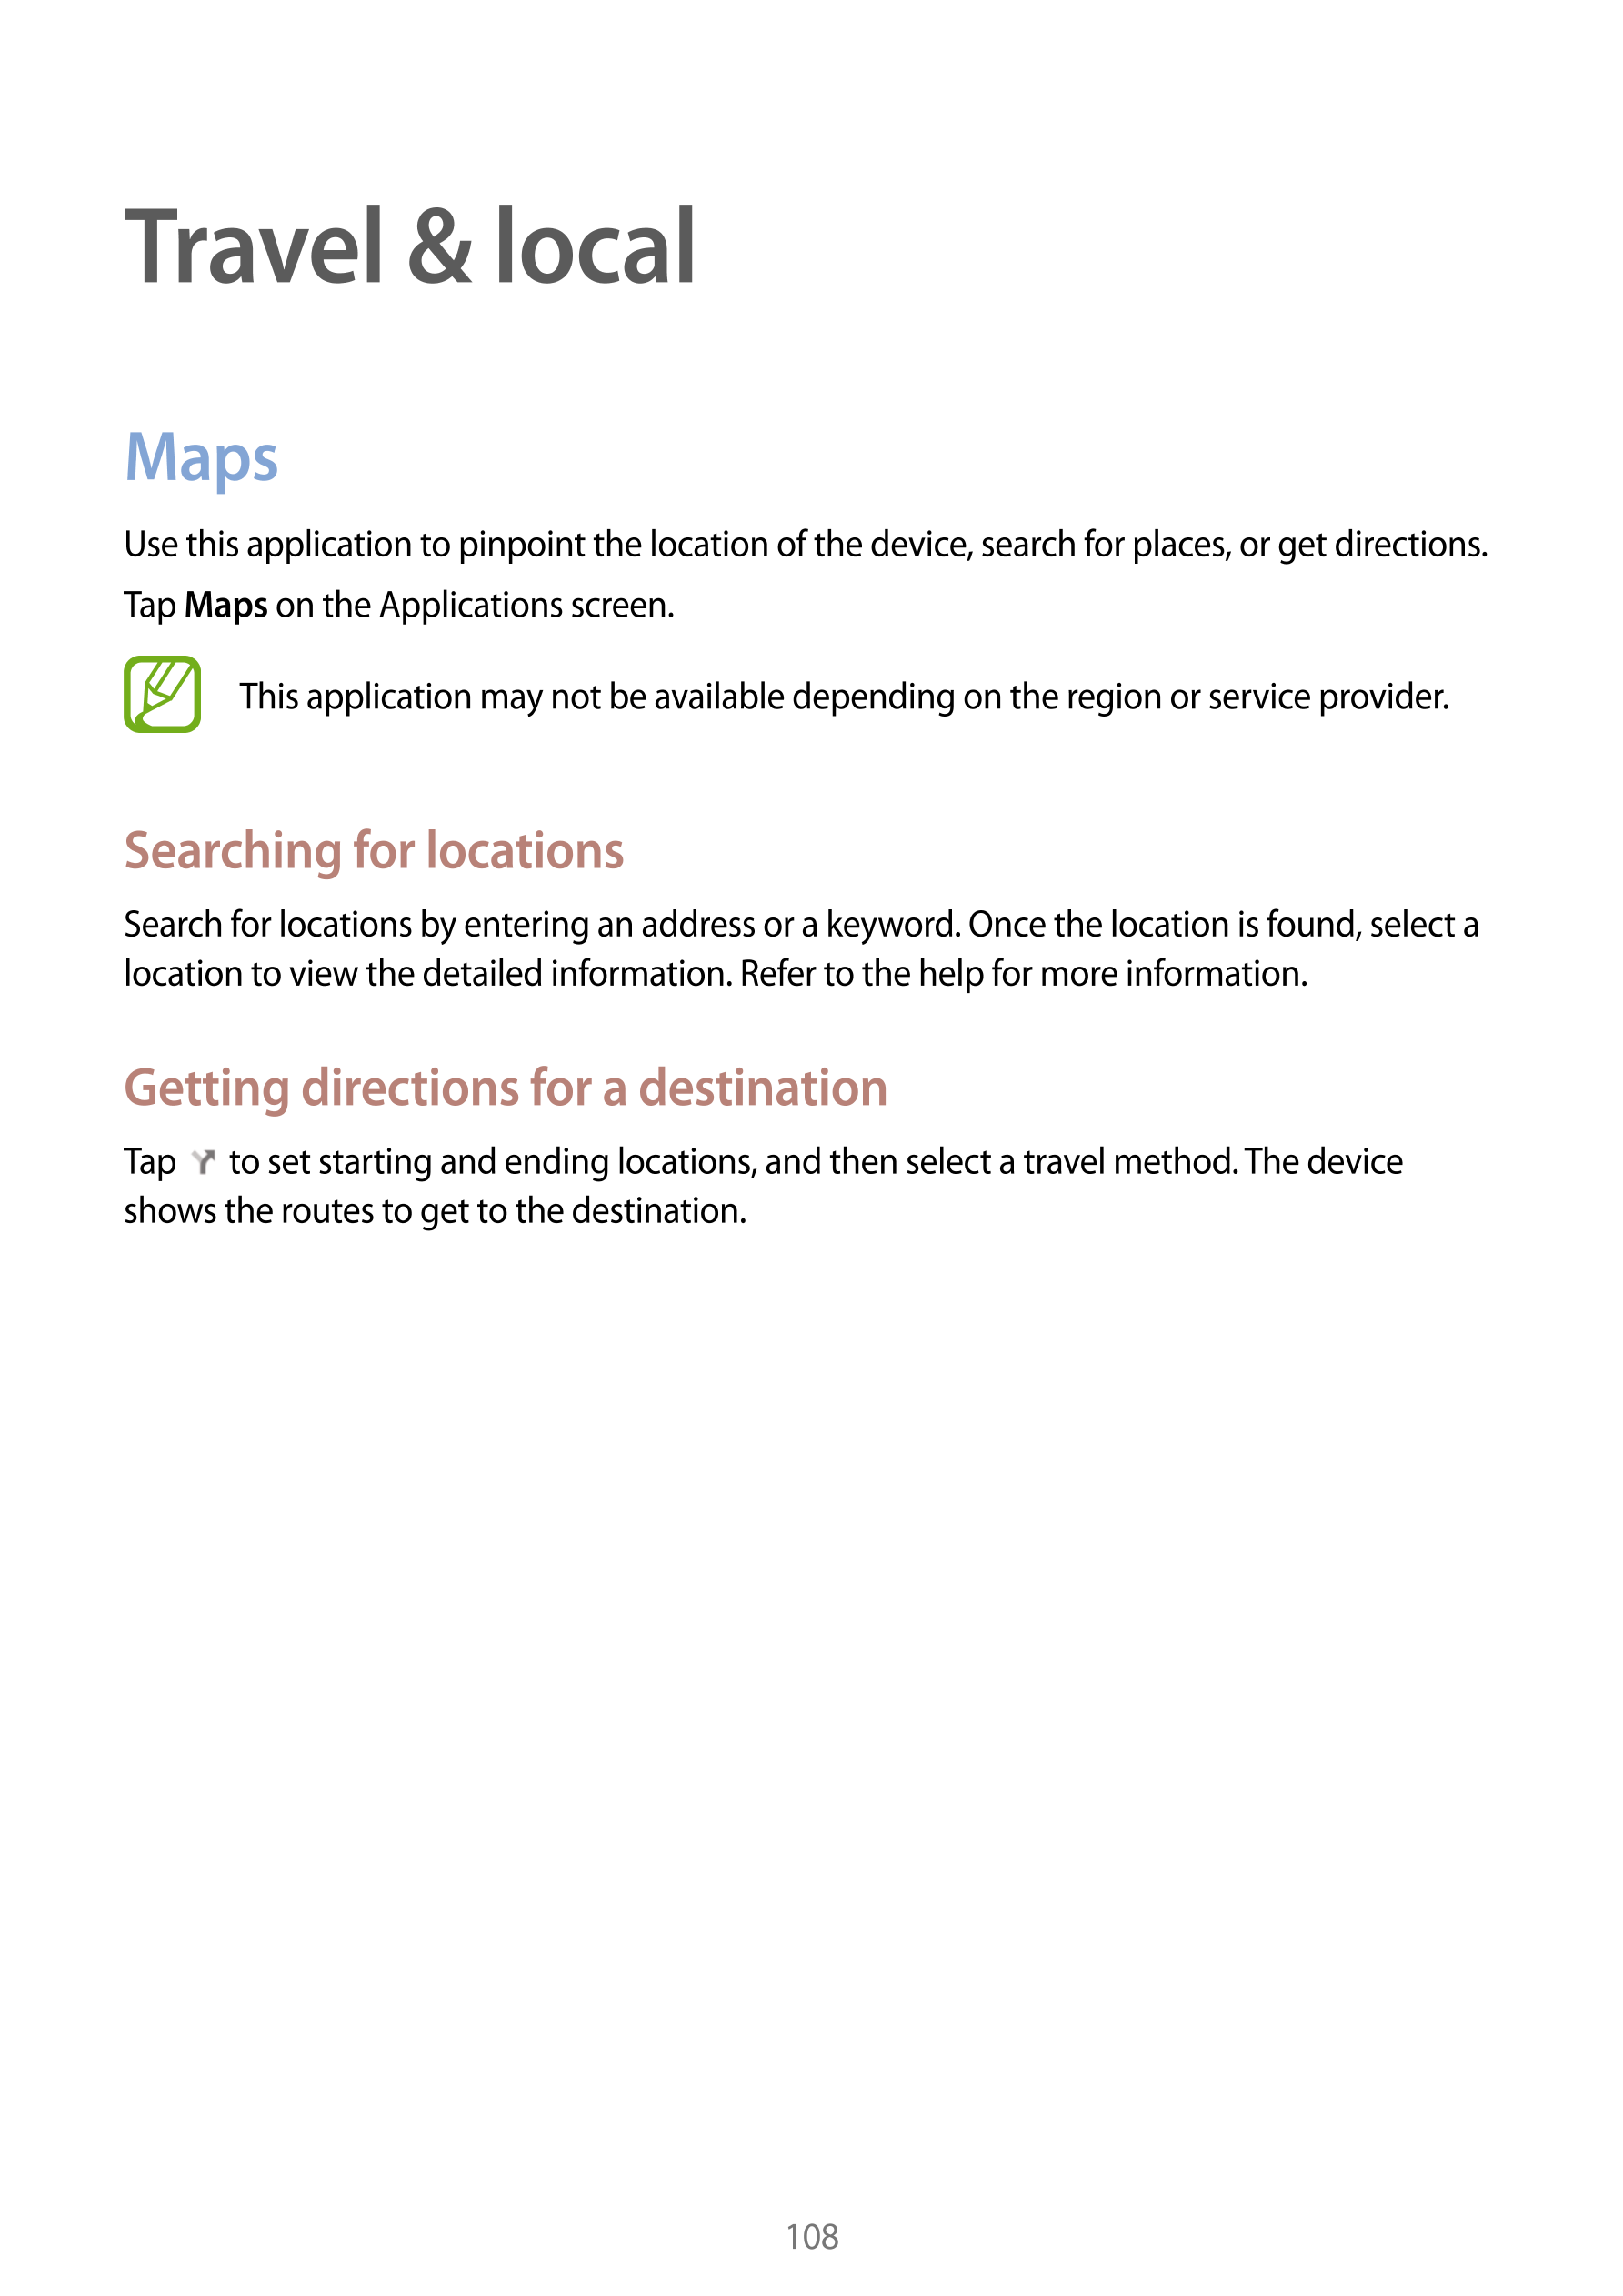 Travel & local
Maps
Use this application to pinpoint the location of the device, search for places, or get directions.
Tap  Maps